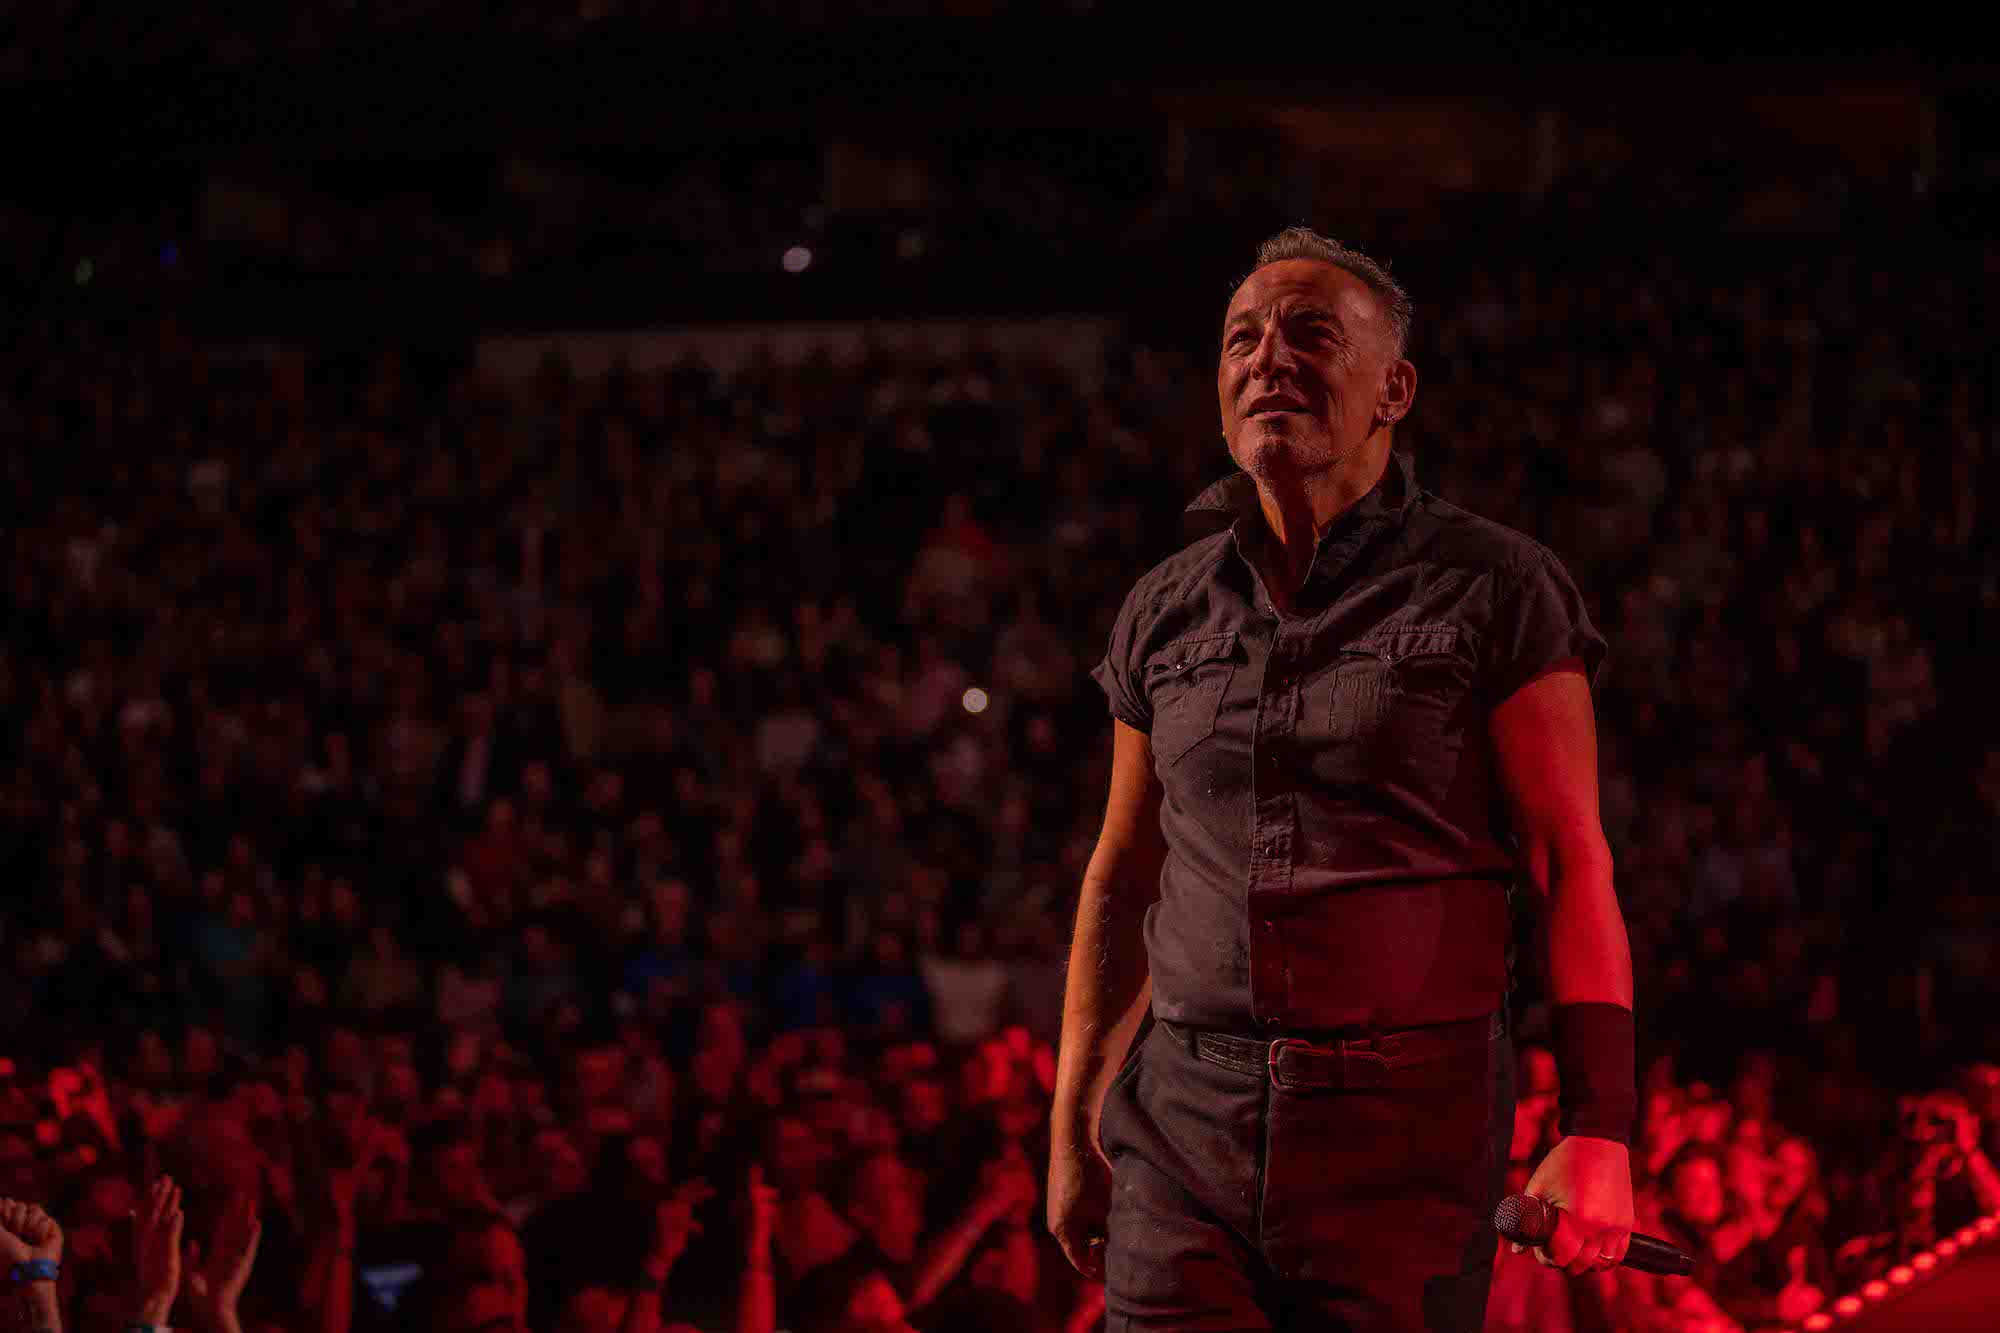 Bruce Springsteen & E Street Band at American Airlines Center, Dallas, Texas on February 10, 2023.